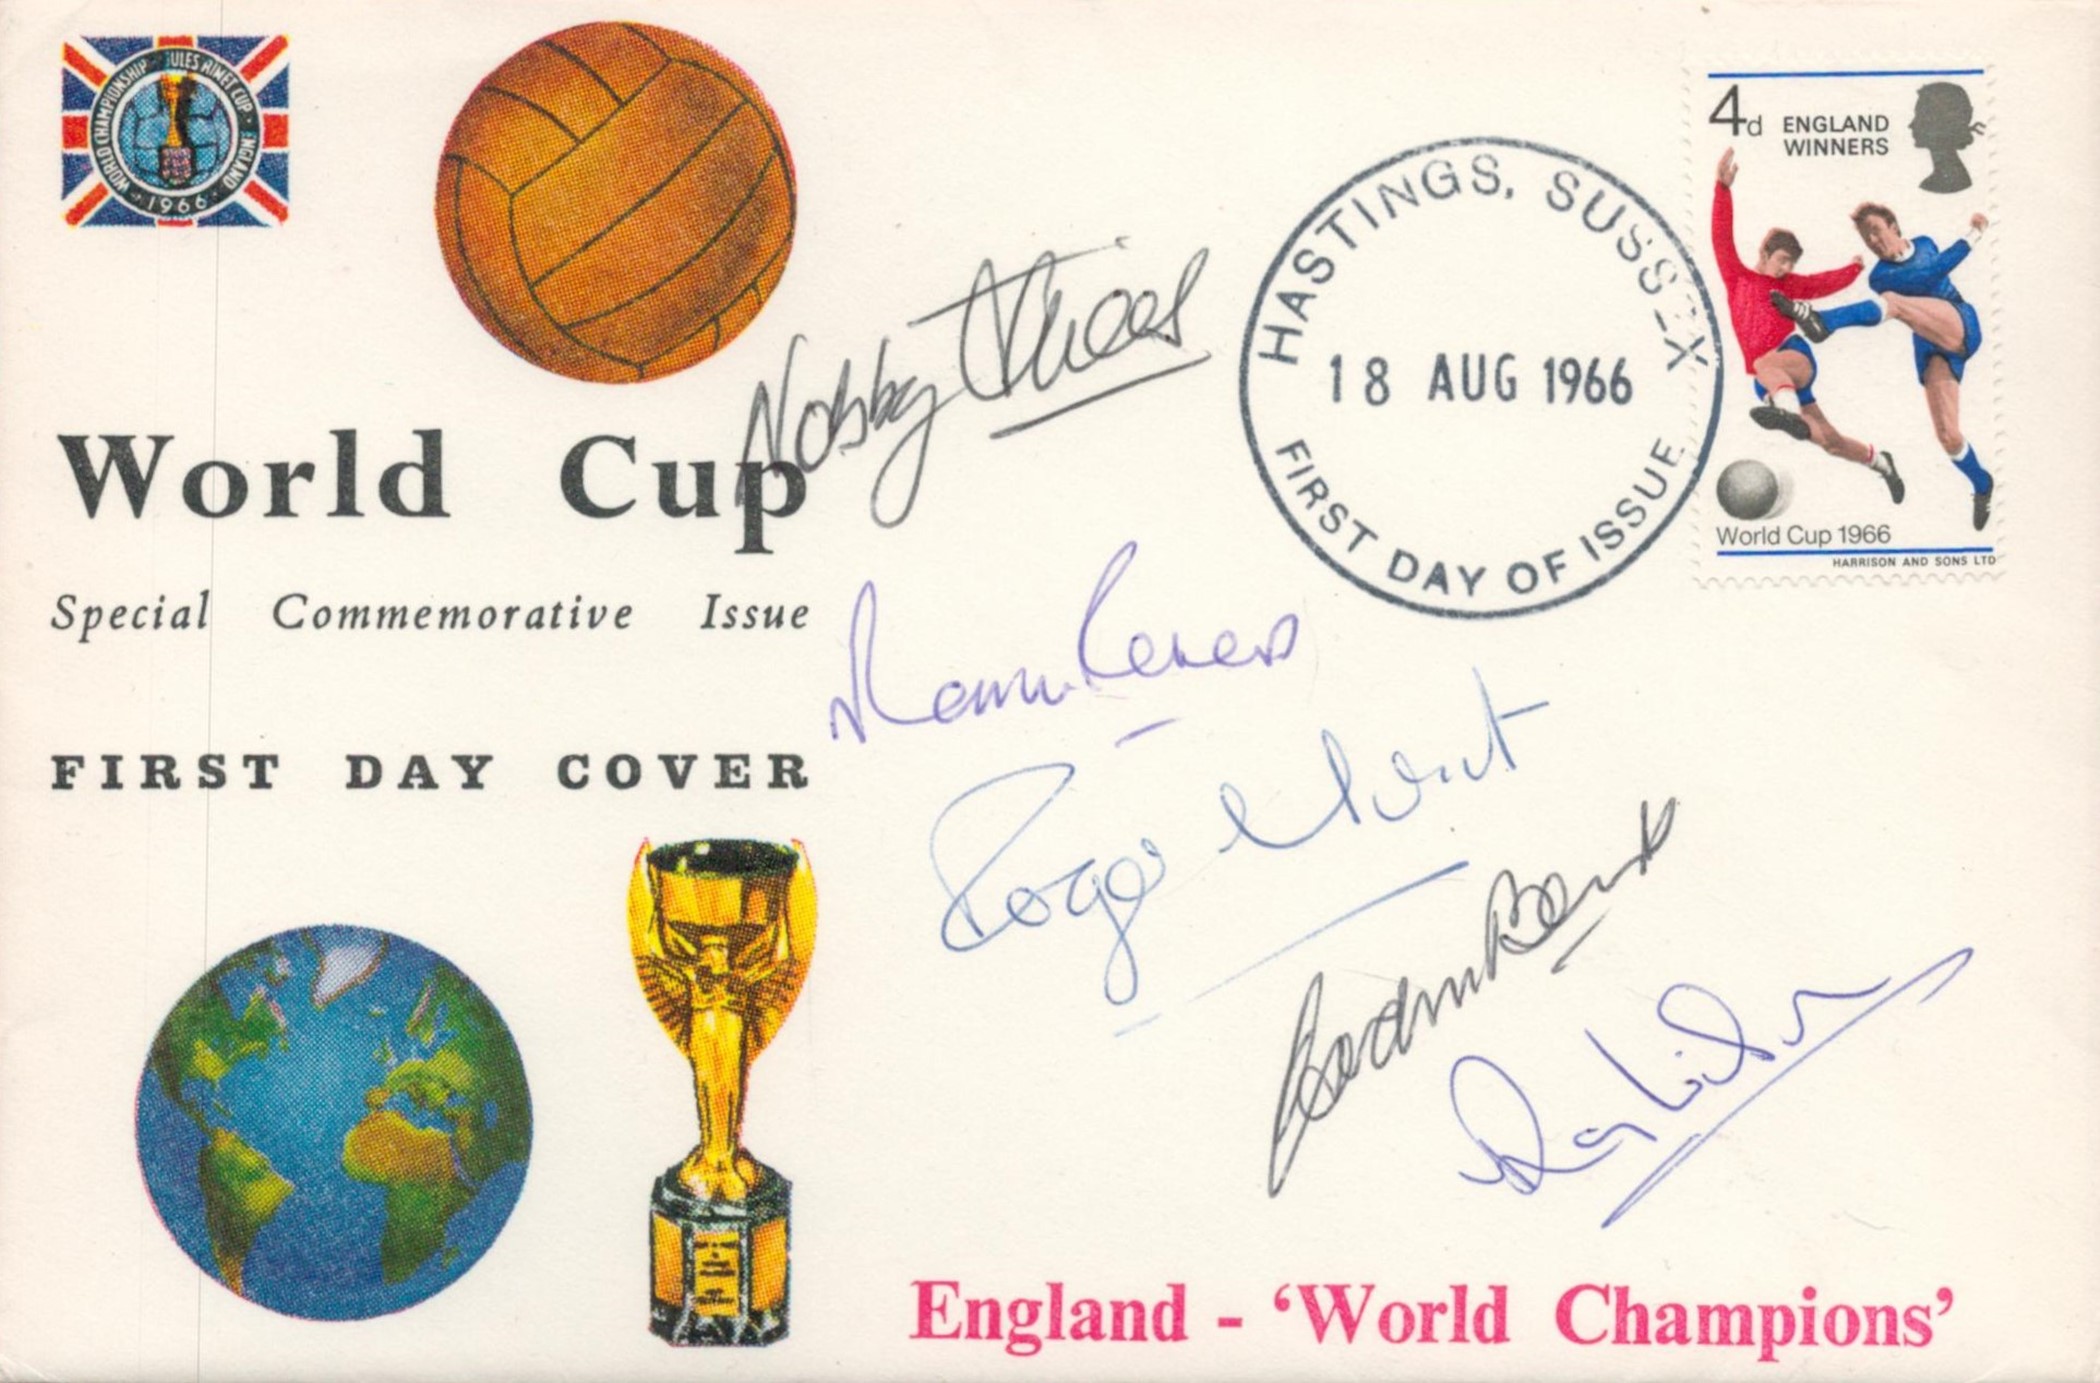 Superb World Cup Special First Day Cover Signed by 5 1966 World Cup winners. Good condition. All